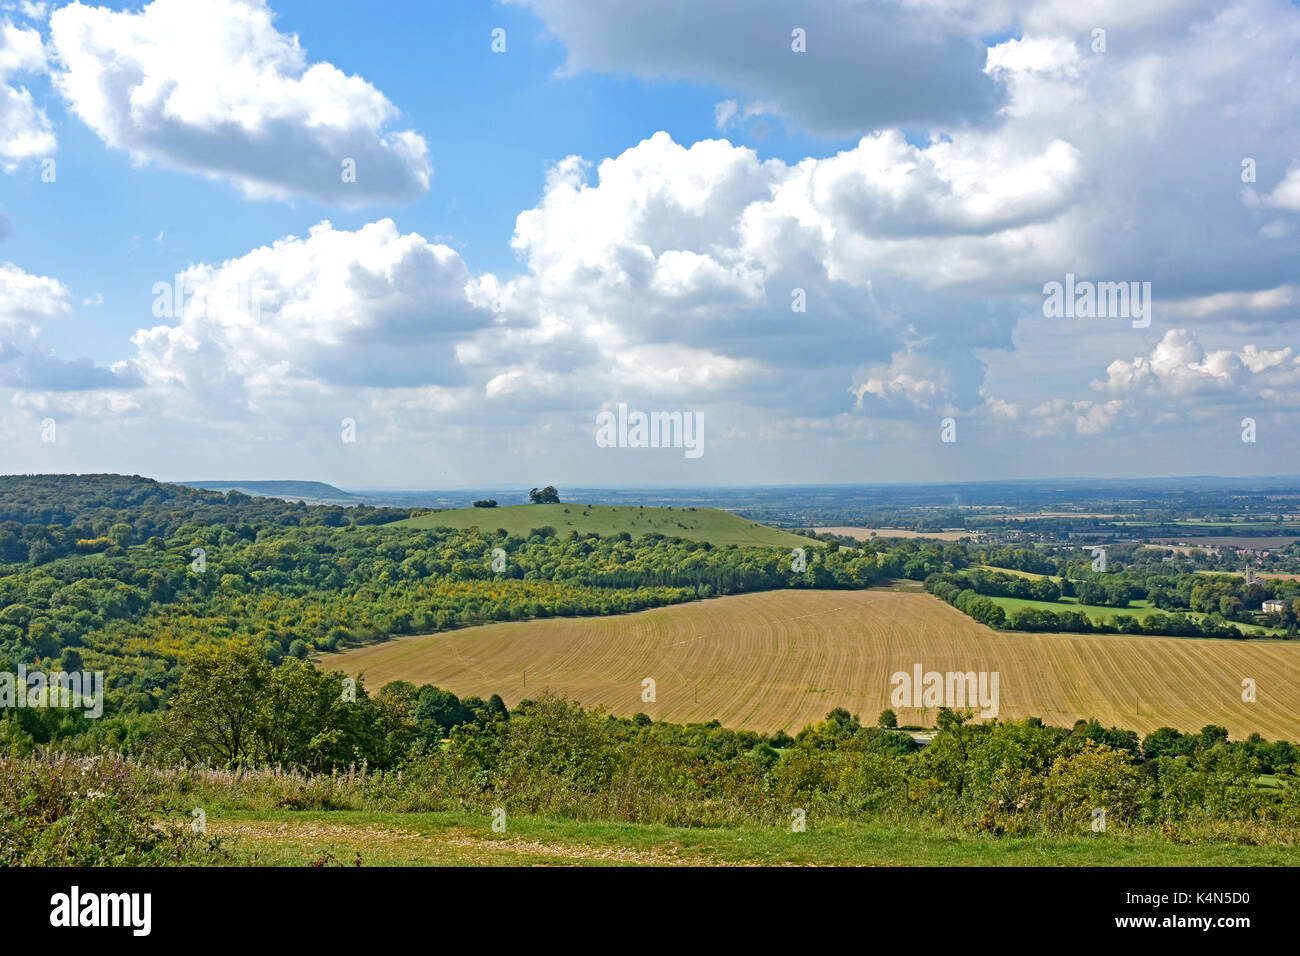 Chiltern Hills - view to Beacon Hill - Chequers Estate -Pulpit Hill beyond - fields - woodland - sunlight - cloud flecked blue sky Stock Photo